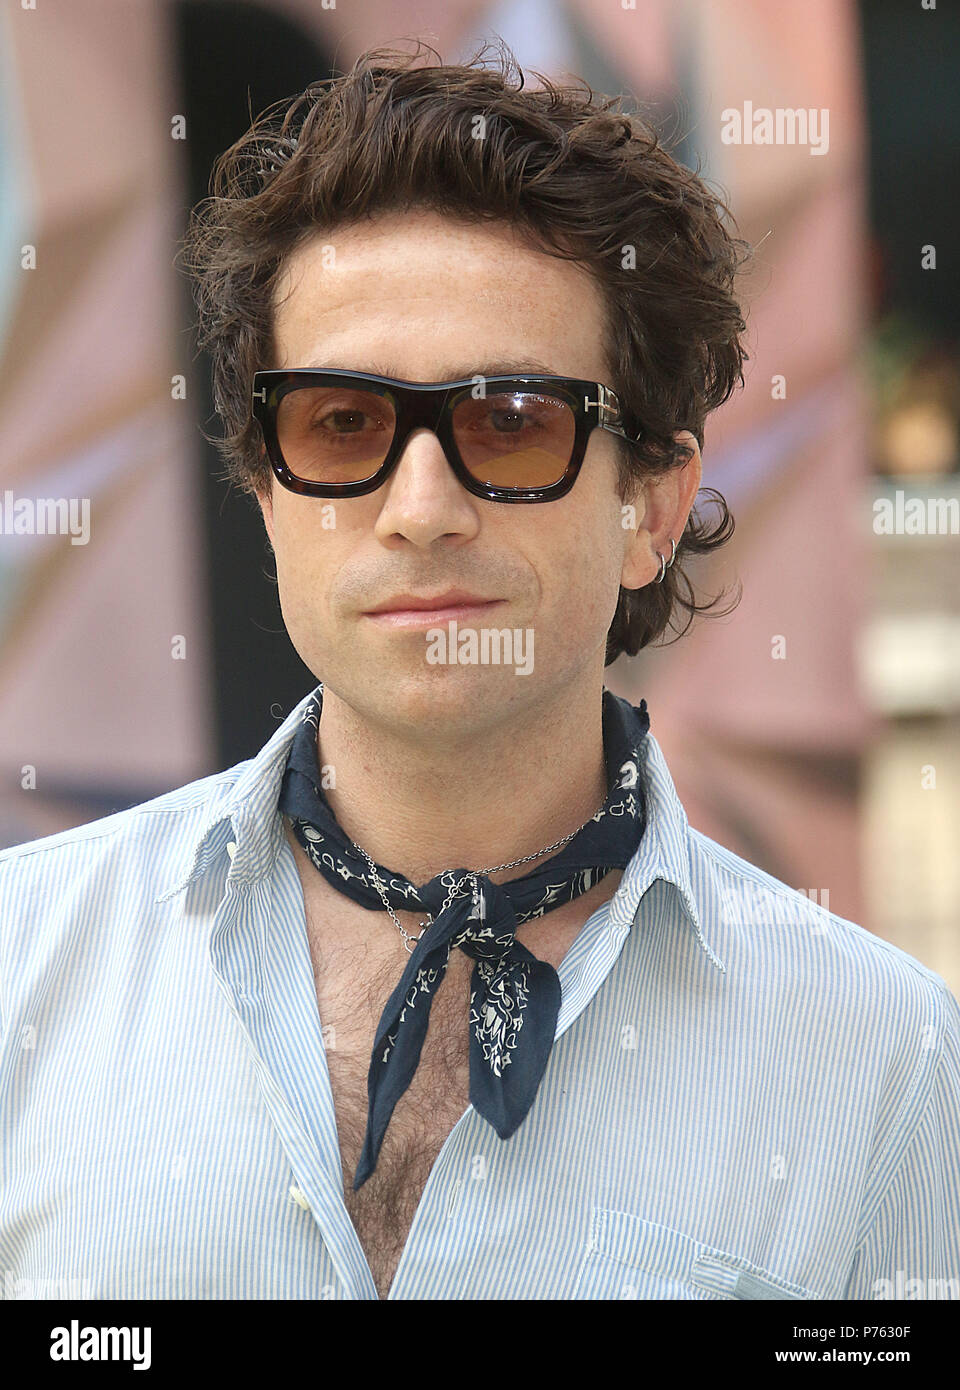 Jun 06, 2018 - Nick Grimshaw attending Royal Academy Of Arts 250th Summer Exhibition Preview Party at Burlington House in London, England, UK Stock Photo